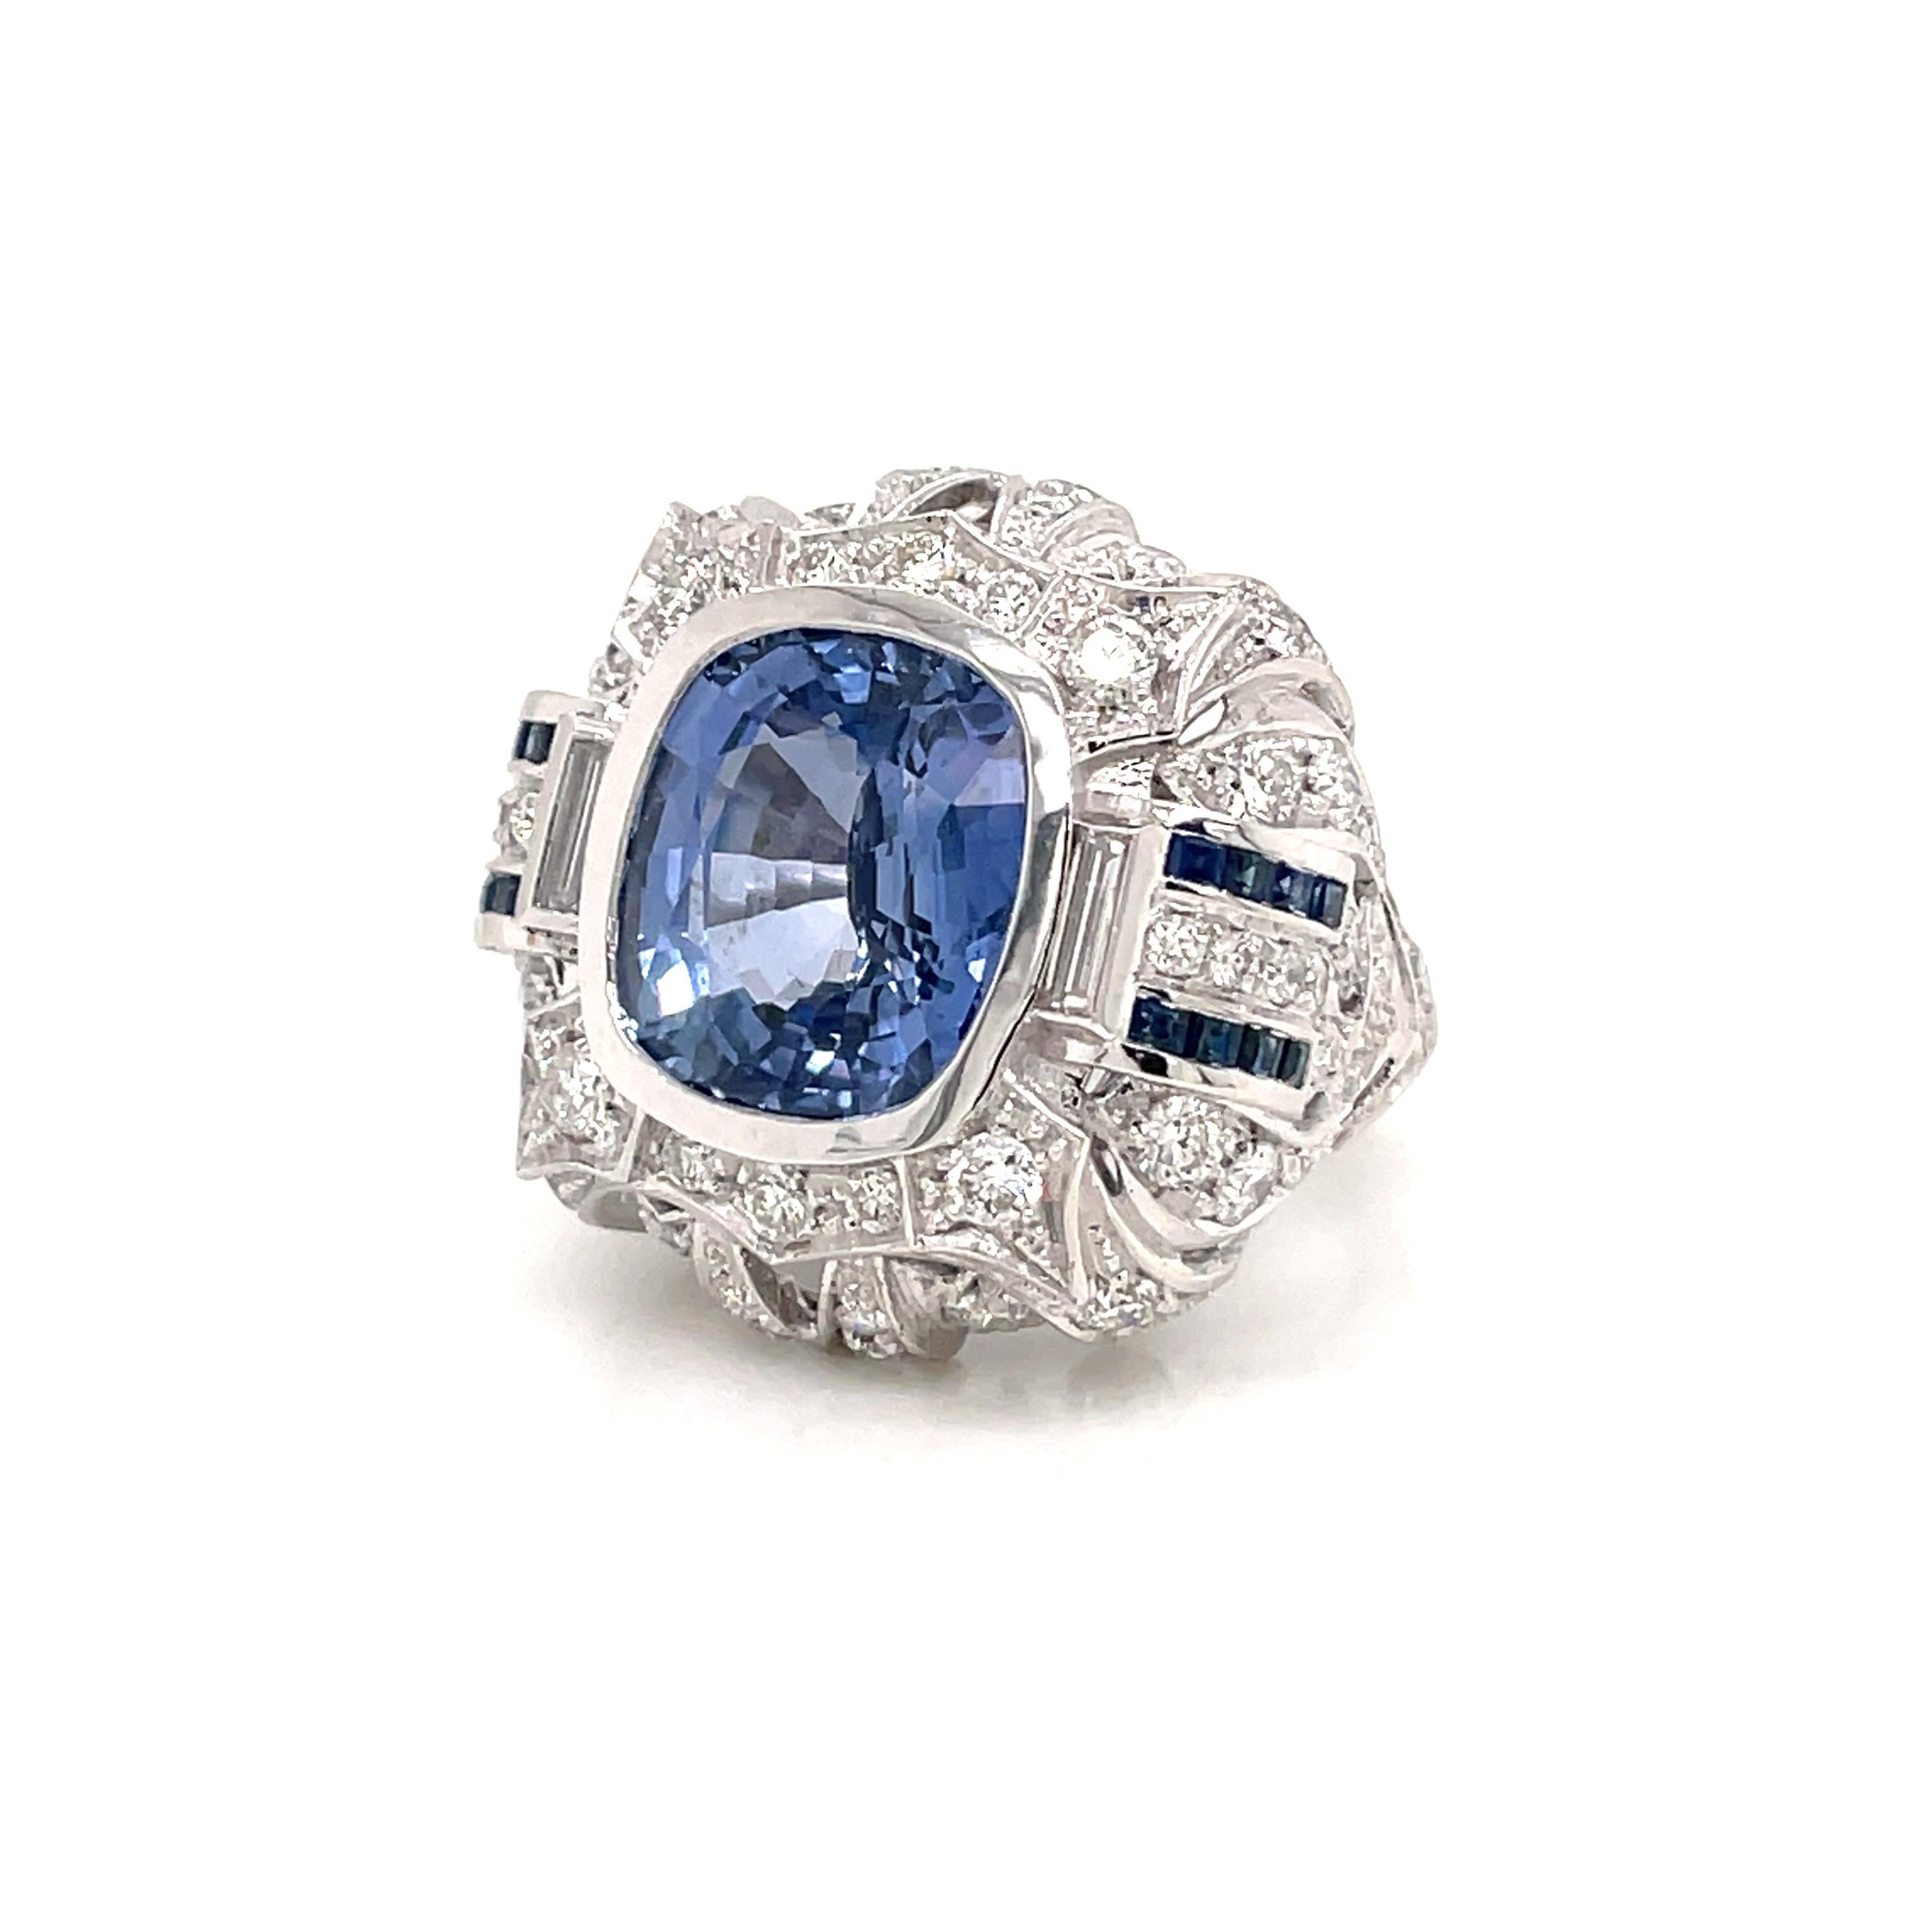 An exquisite filigree ring handcrafted in solid 18k white gold by master jewelers, featuring an amazing vivid 12,24 carat Ceylon Sapphire cushion-shape, surrounded by 4,50 carats of old cut diamonds colorless and custom cut sapphire.

The ring is